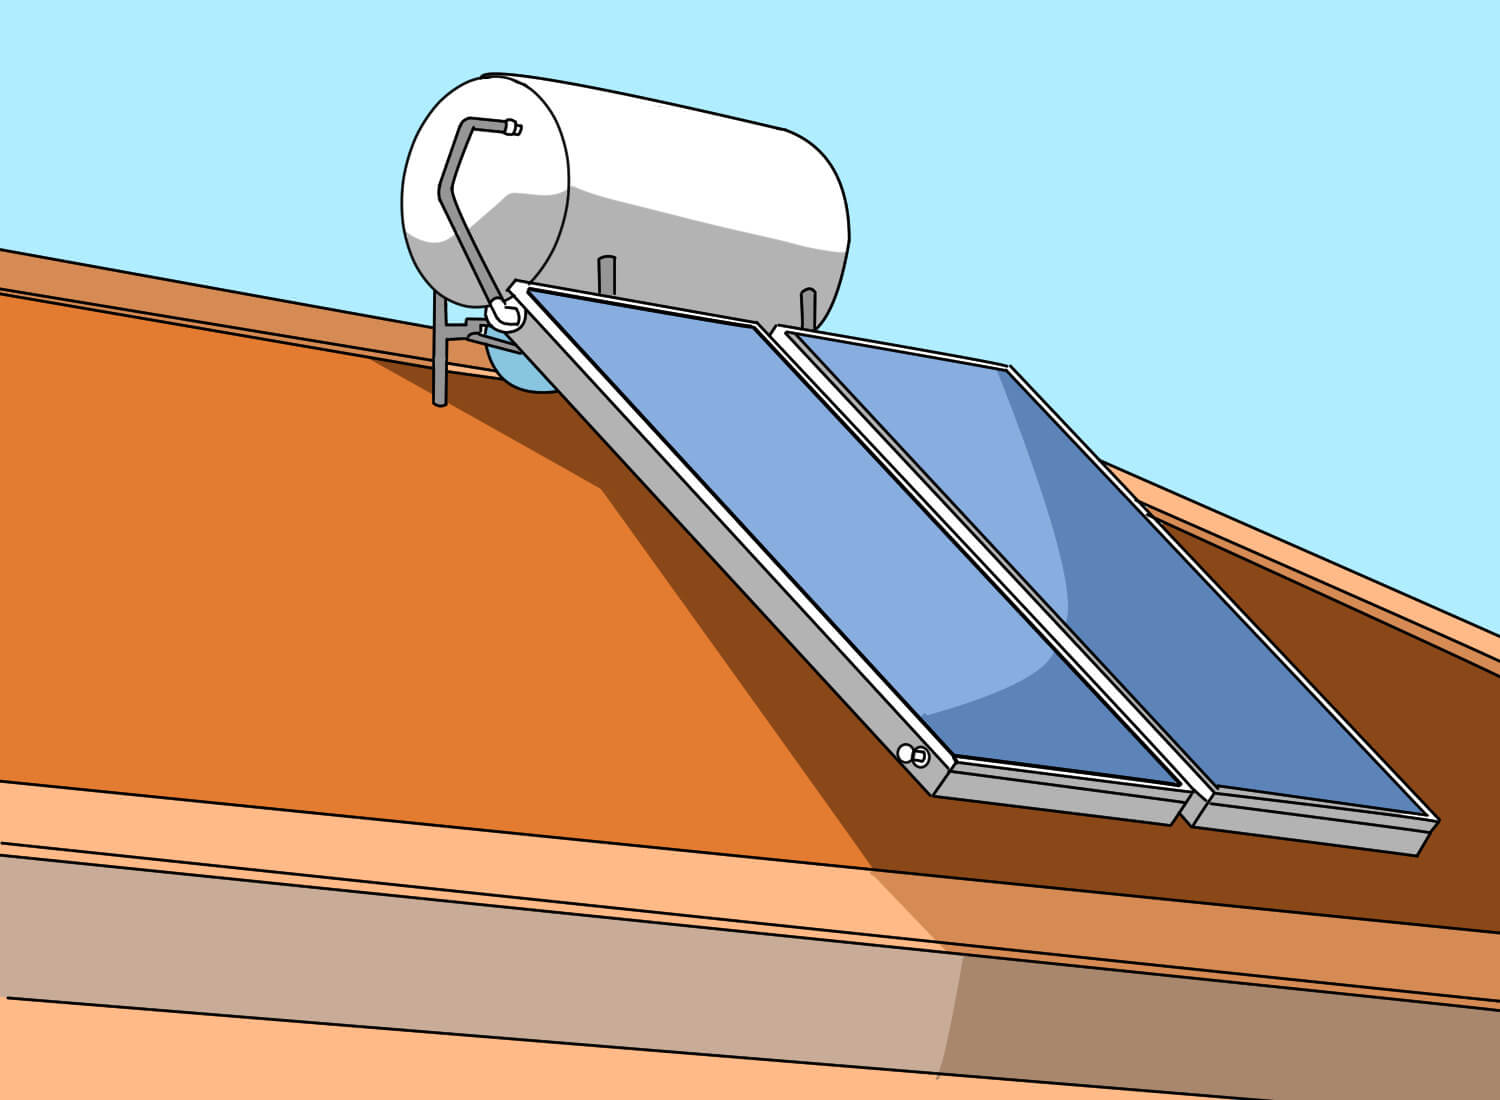 How Much Does a Solar Hot Water System Cost in 2023